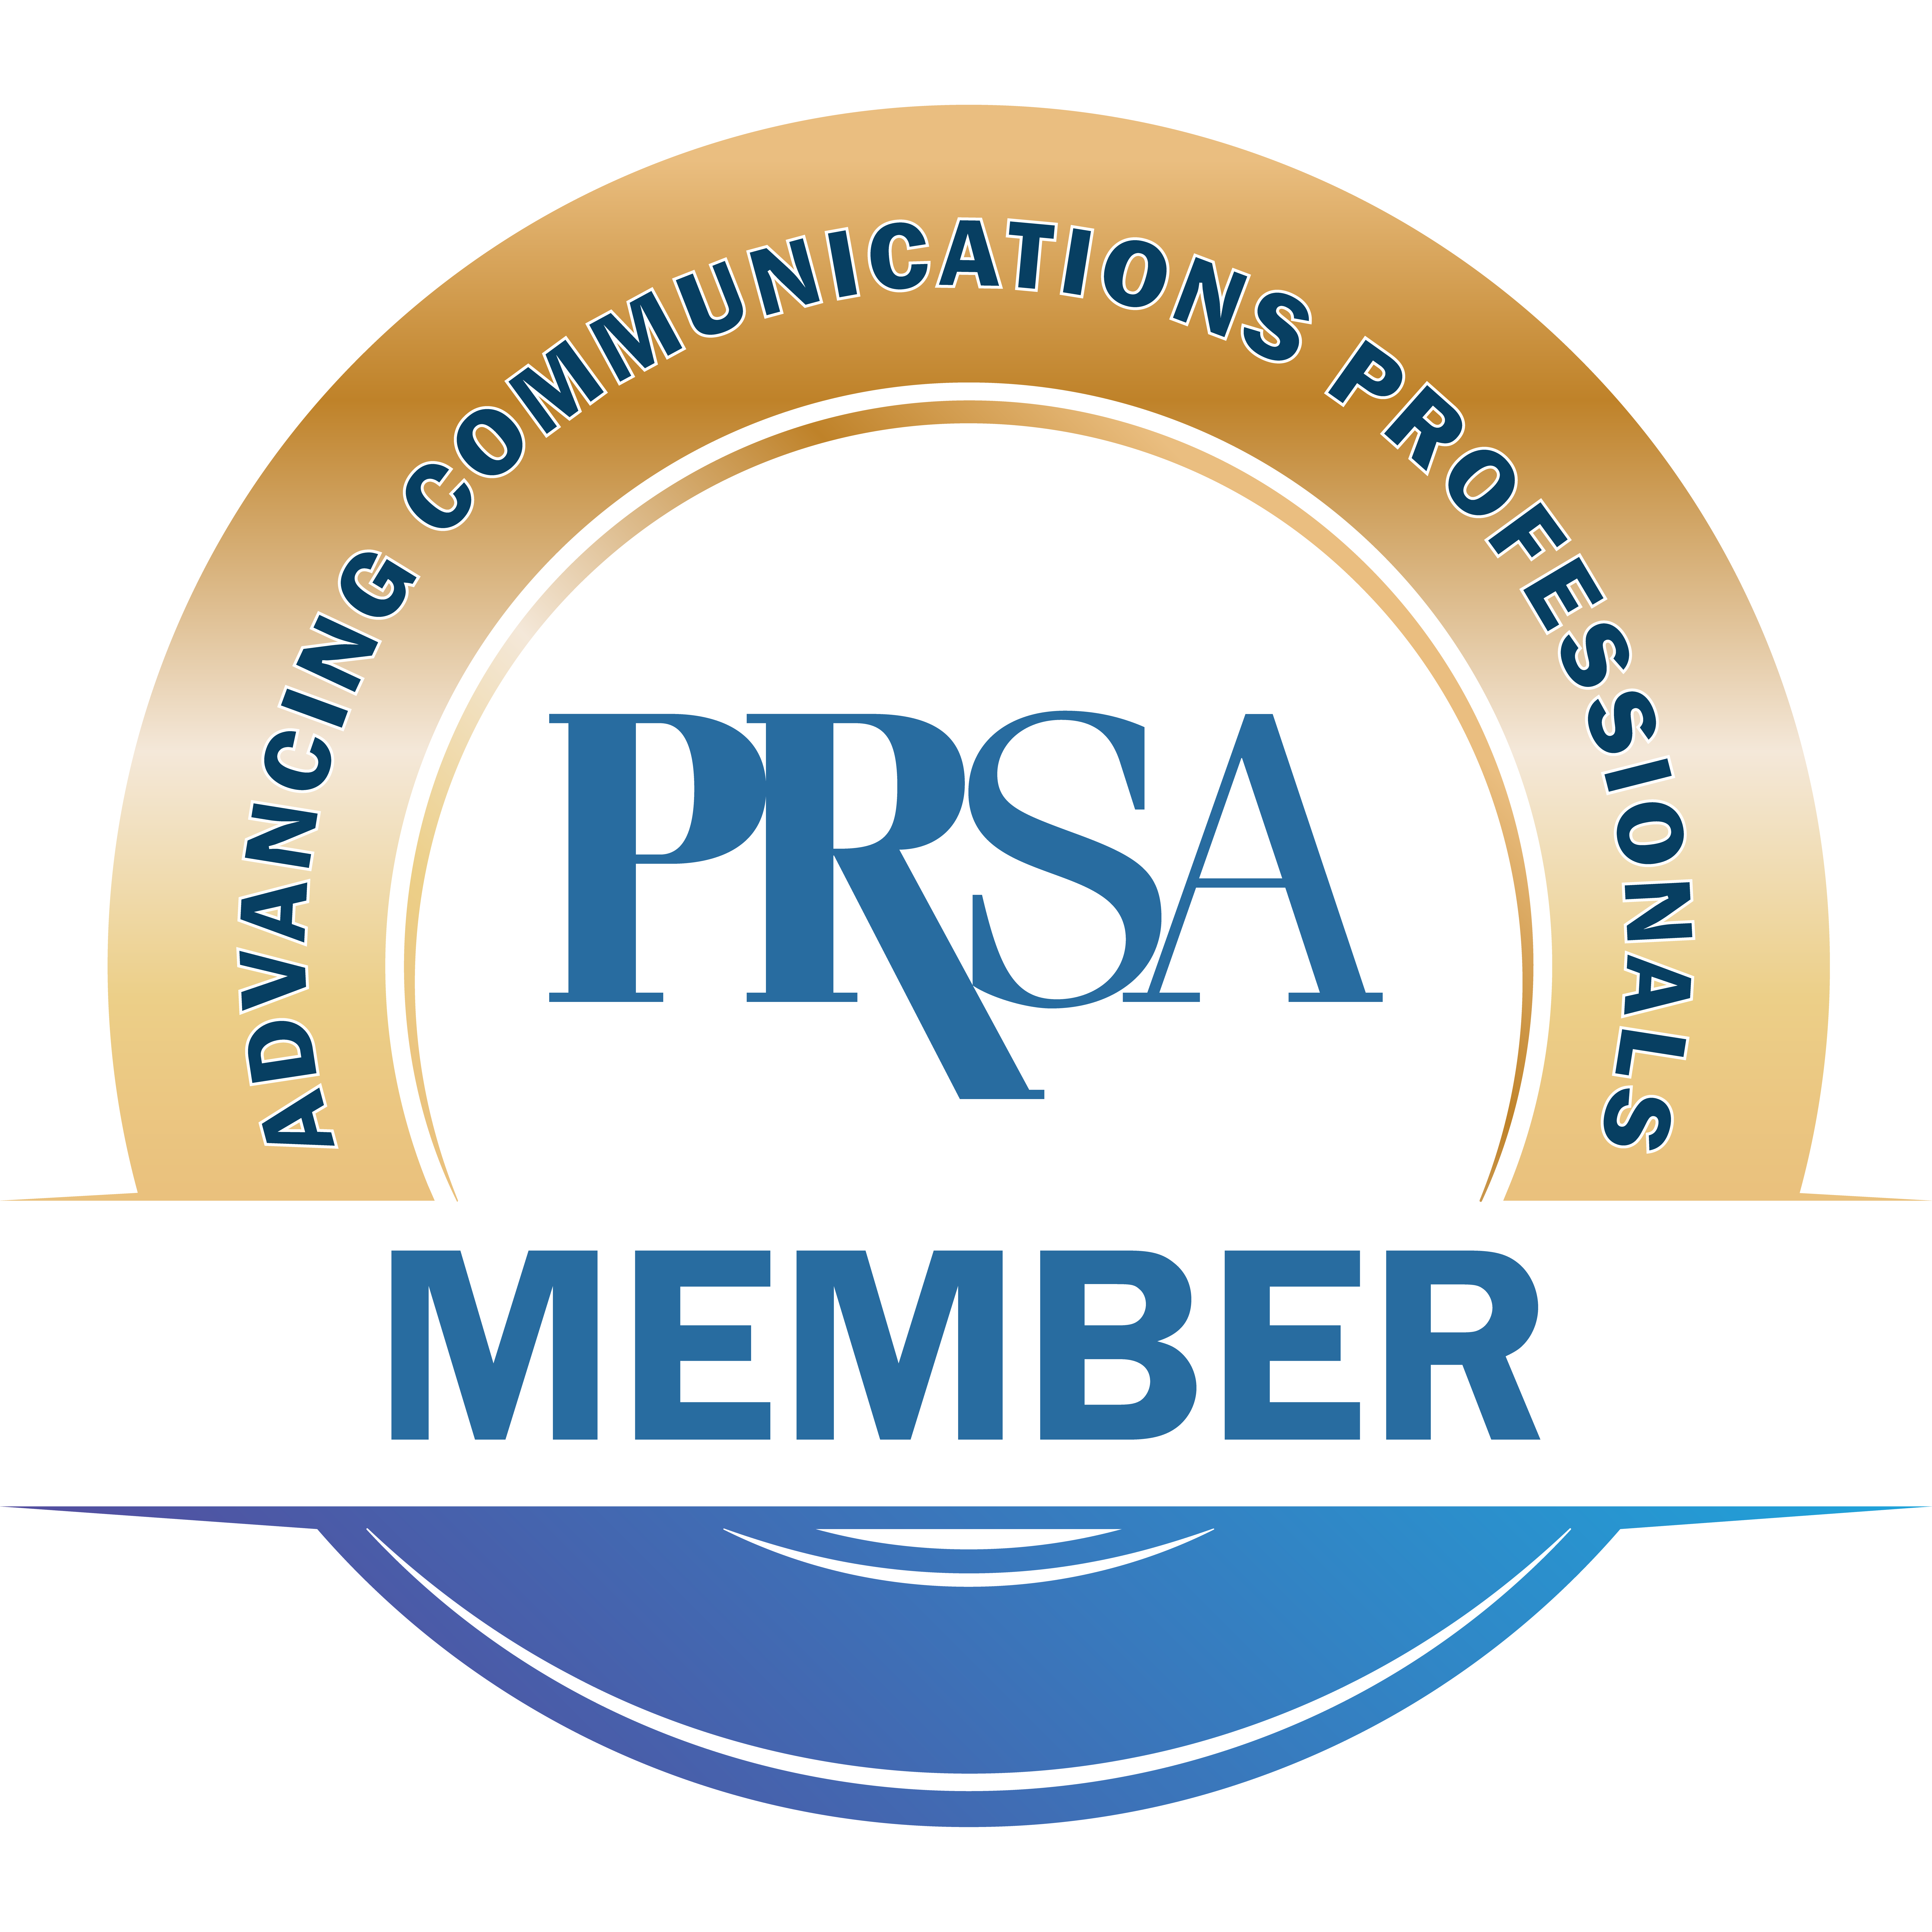 Public Relations Society of America Member — Advancing communicating professionals